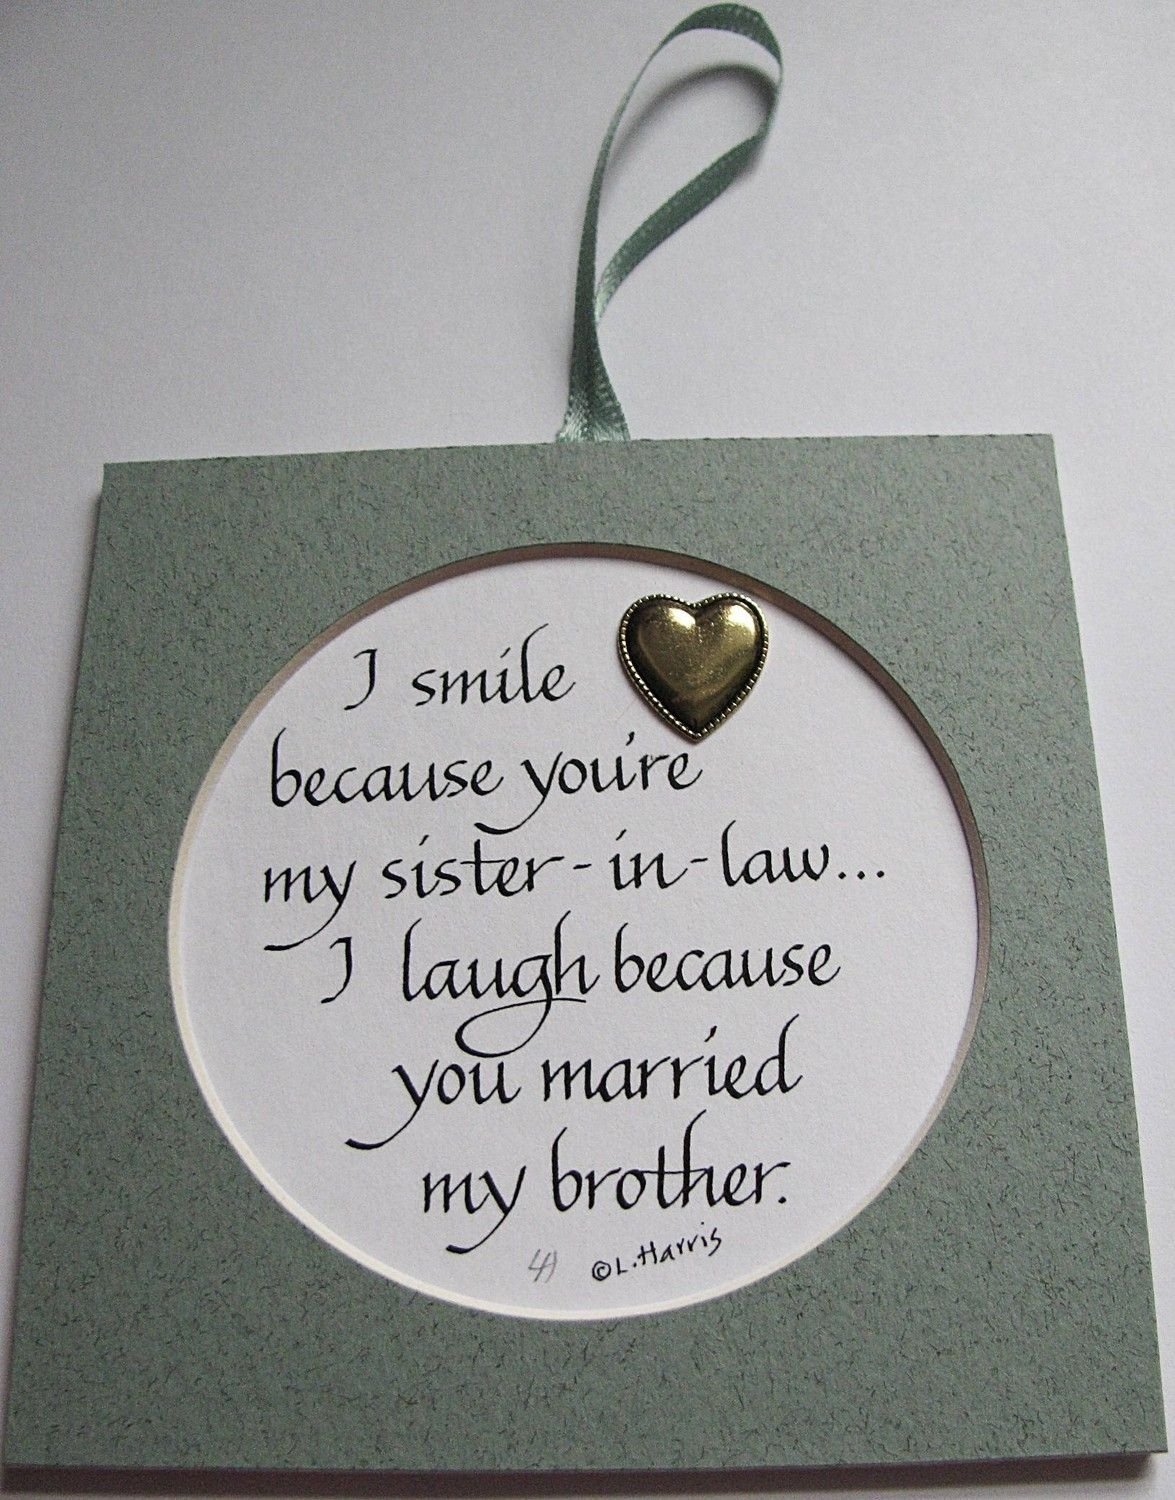 10 Wonderful Sister In Law Gift Ideas i smile because youre my sister in law 8 00 via etsy funny 3 2023